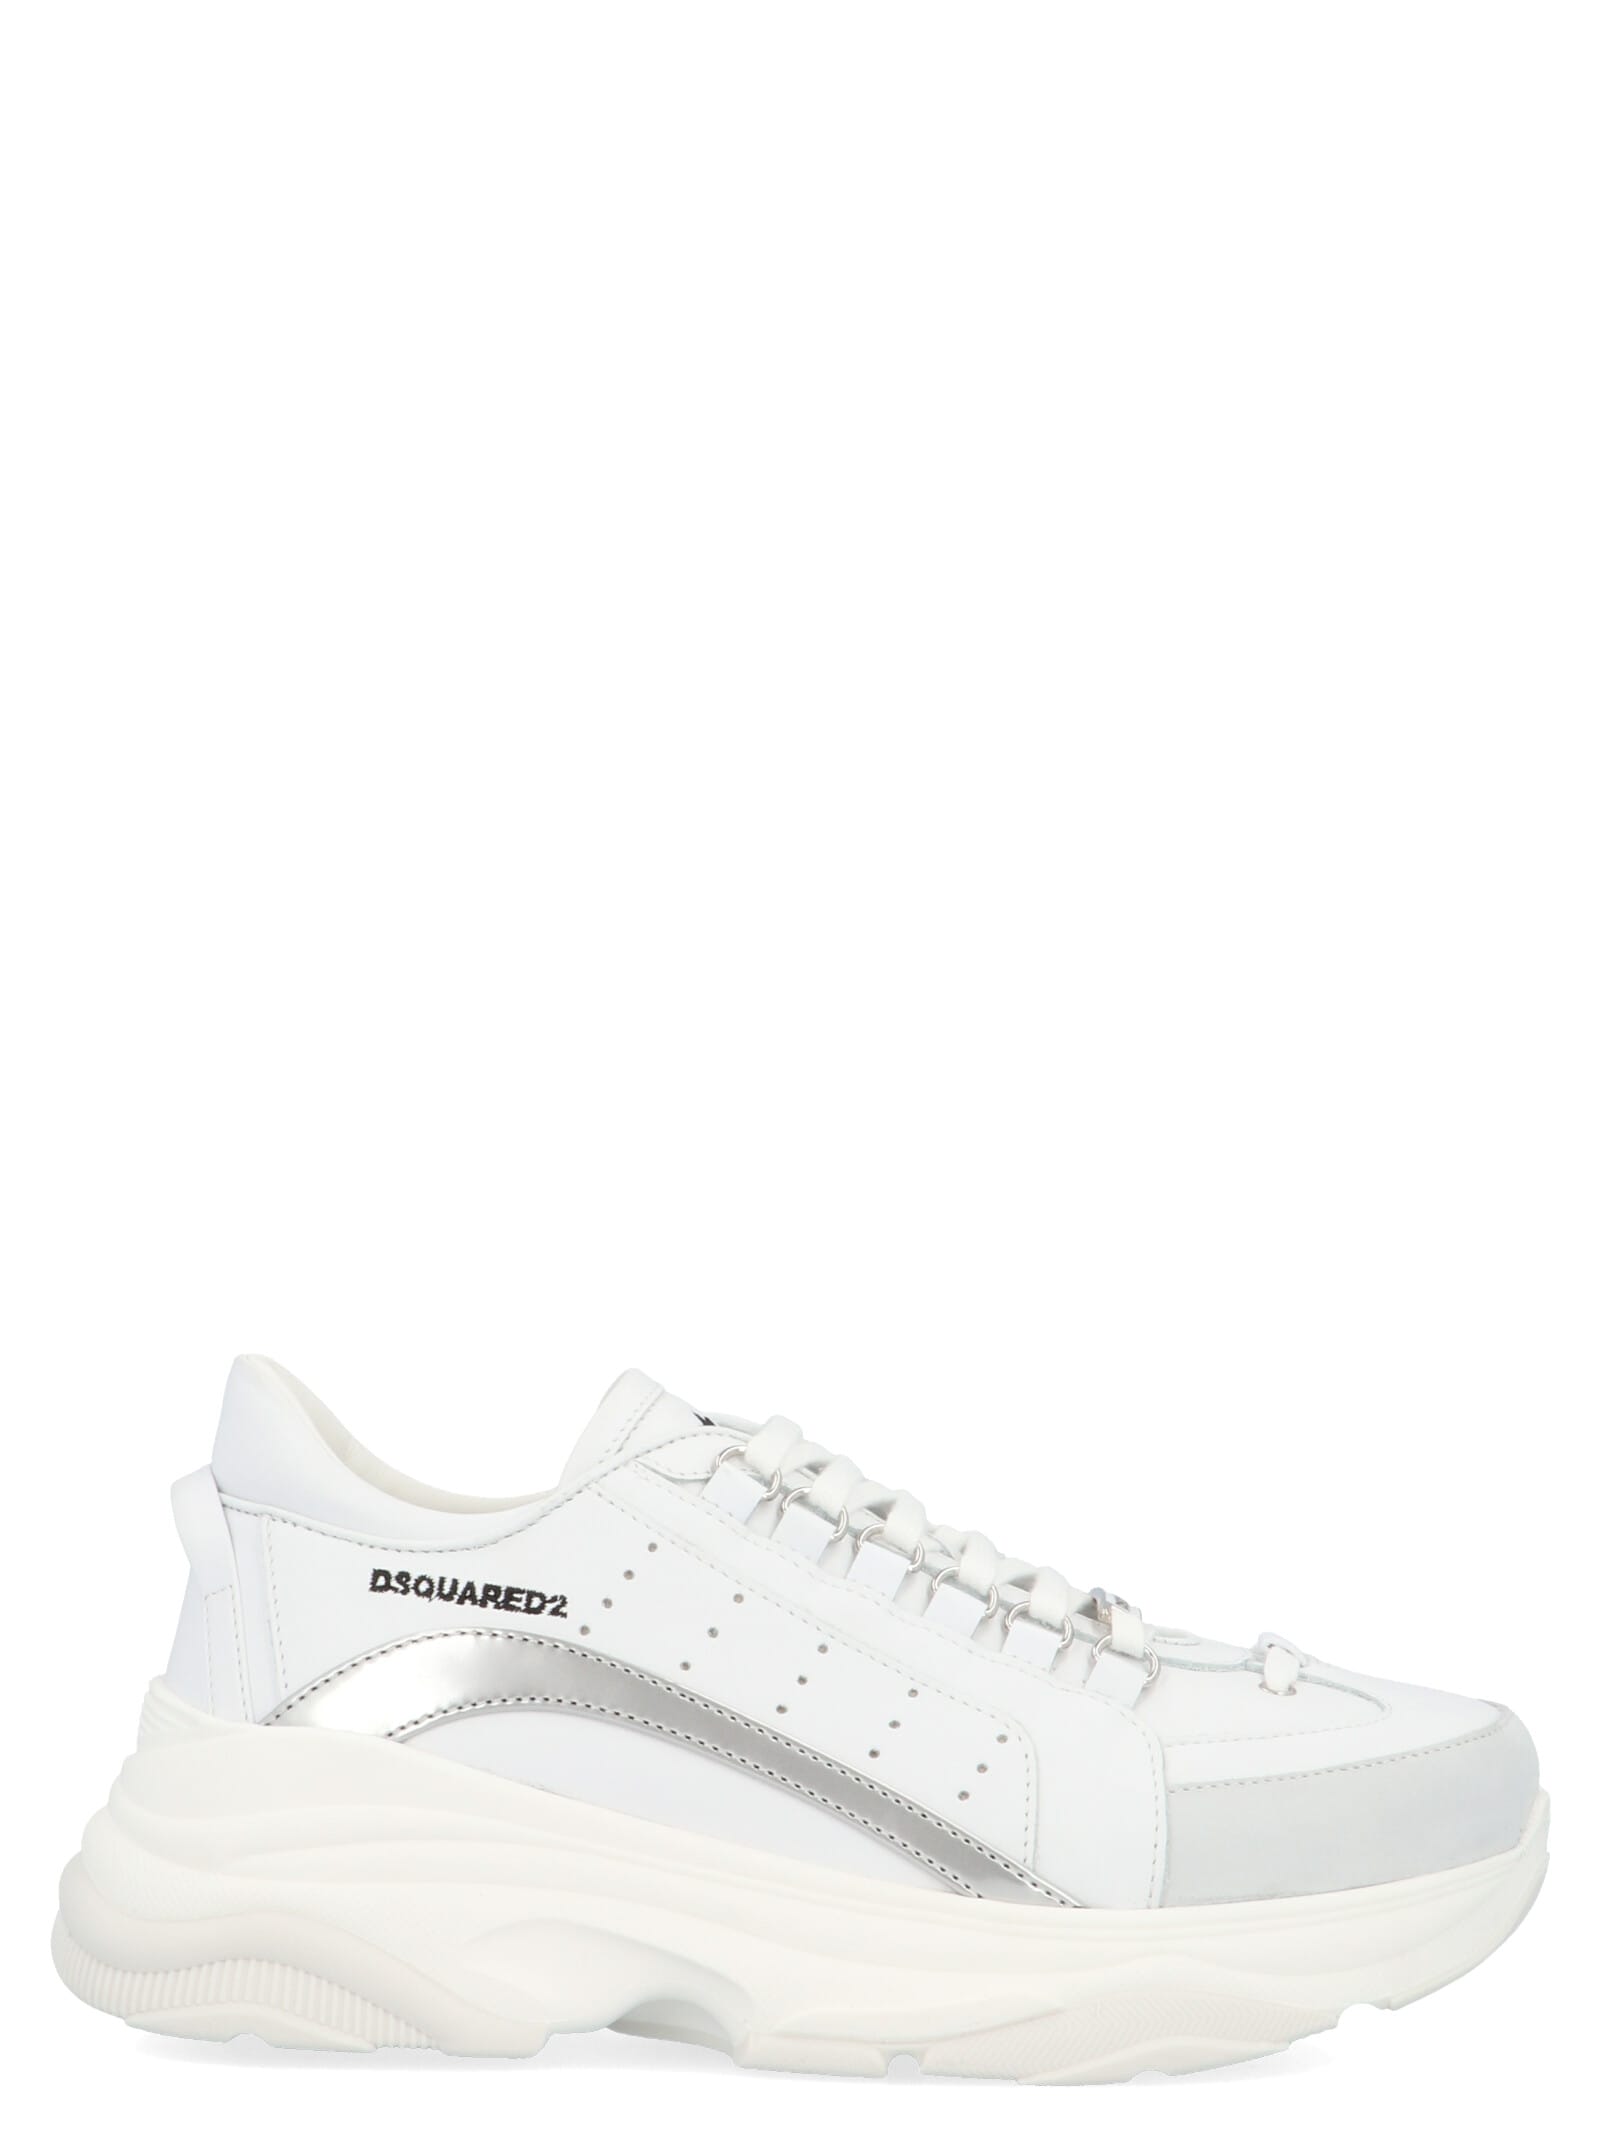 dsquared 551 sneakers sale - 62% remise 